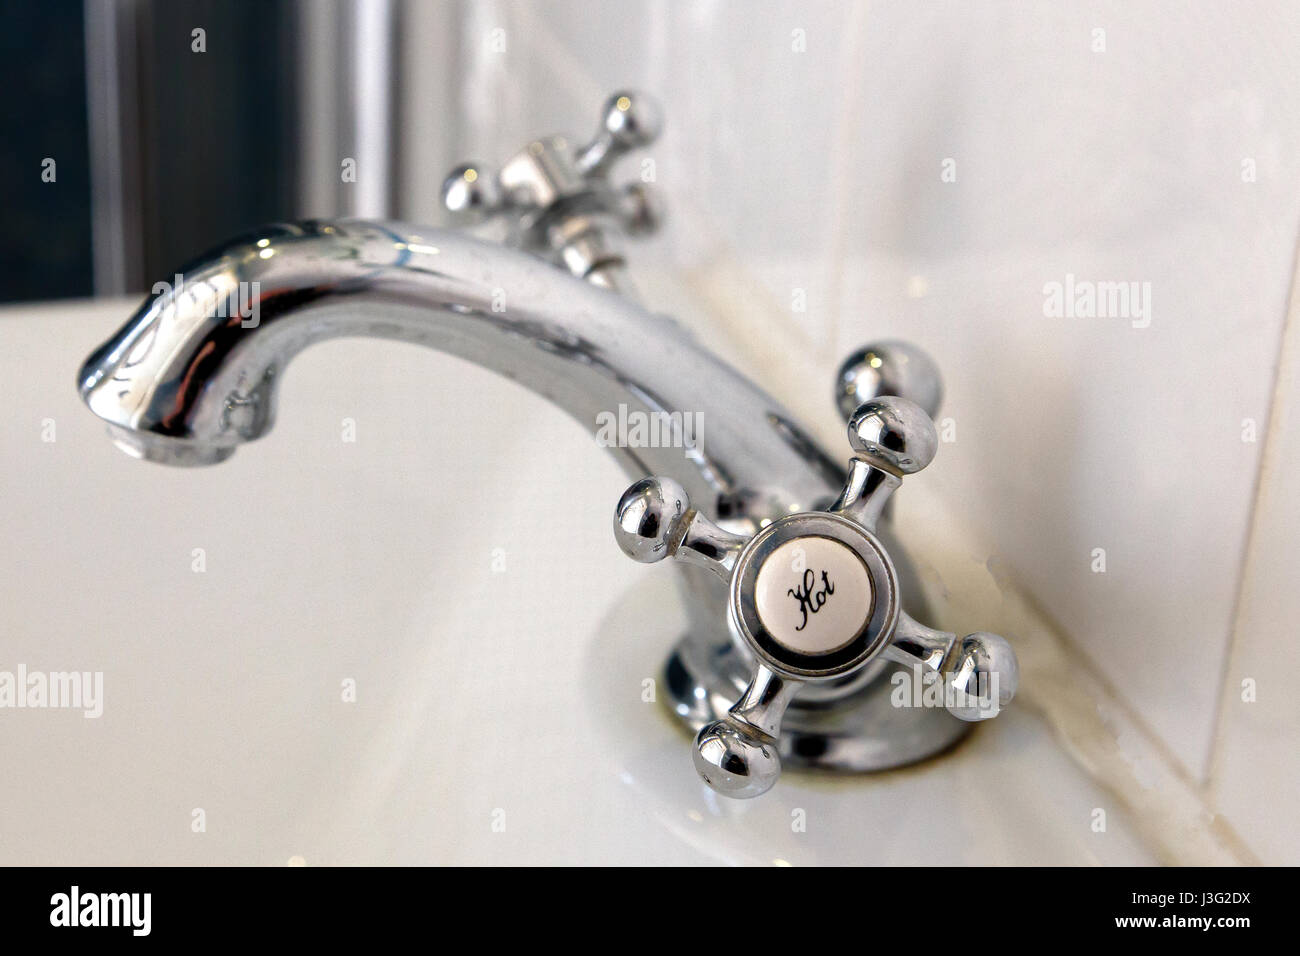 Modern shower room sink (wash basin) with hot tap (faucet) Stock Photo